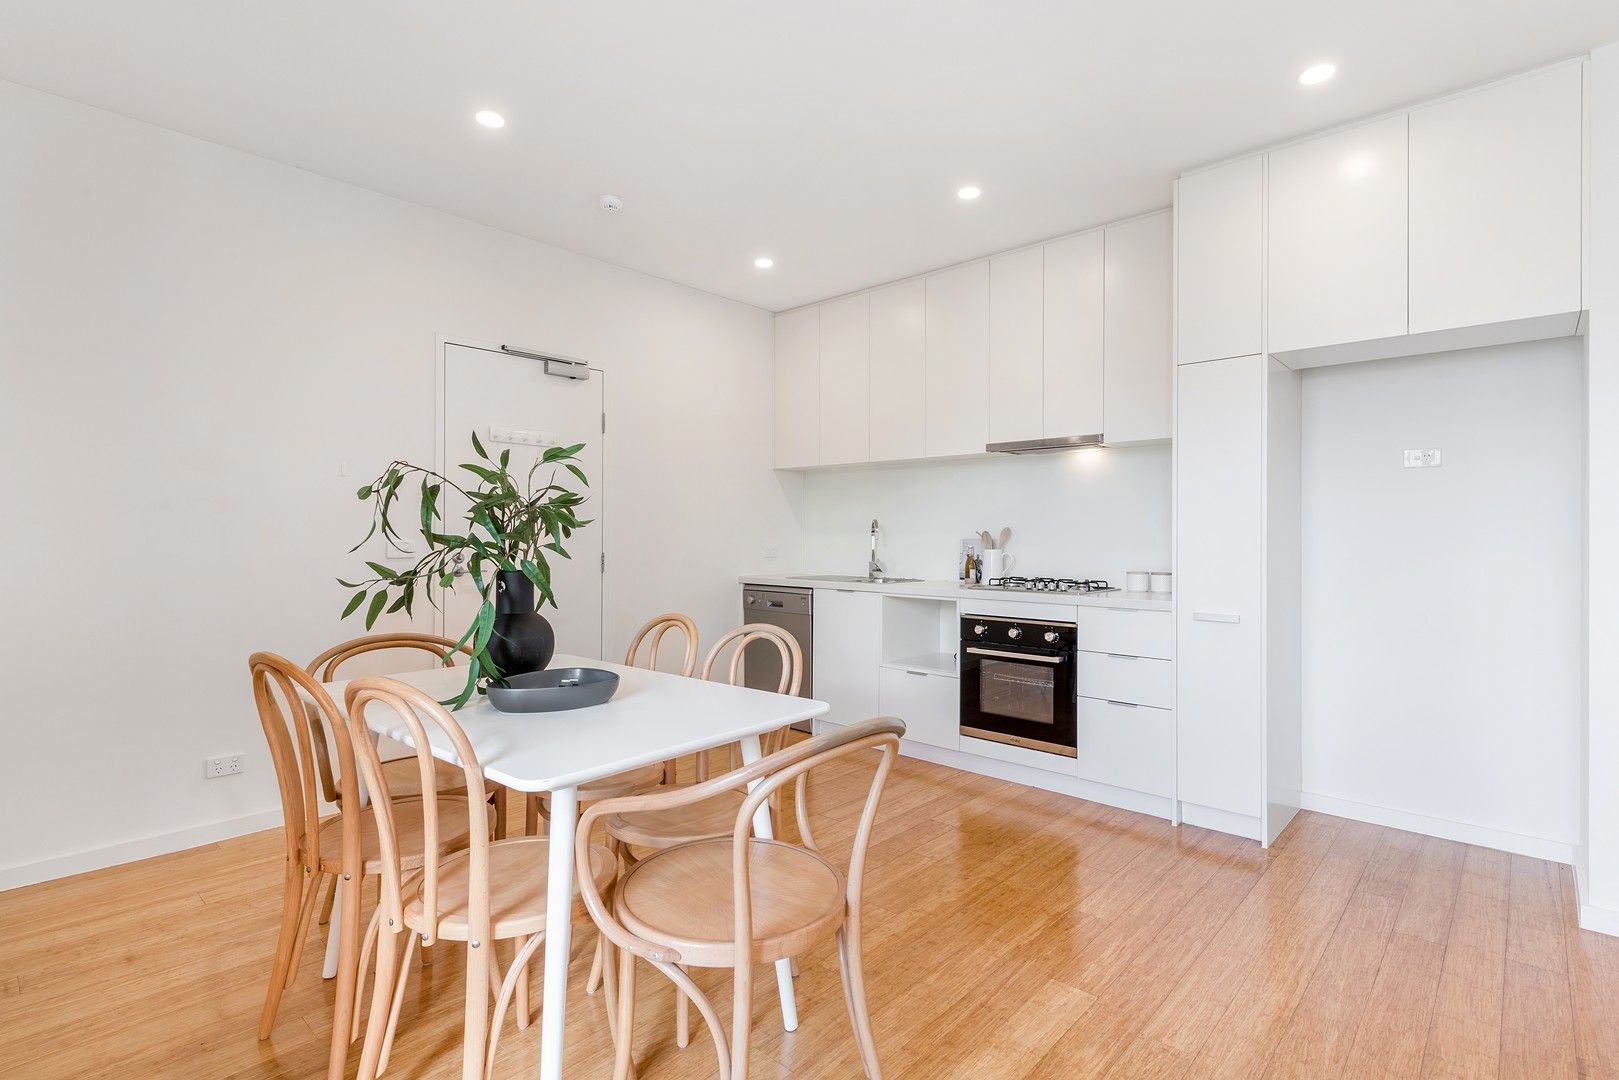 2 bedrooms Apartment / Unit / Flat in 306/1213 Centre Road OAKLEIGH SOUTH VIC, 3167